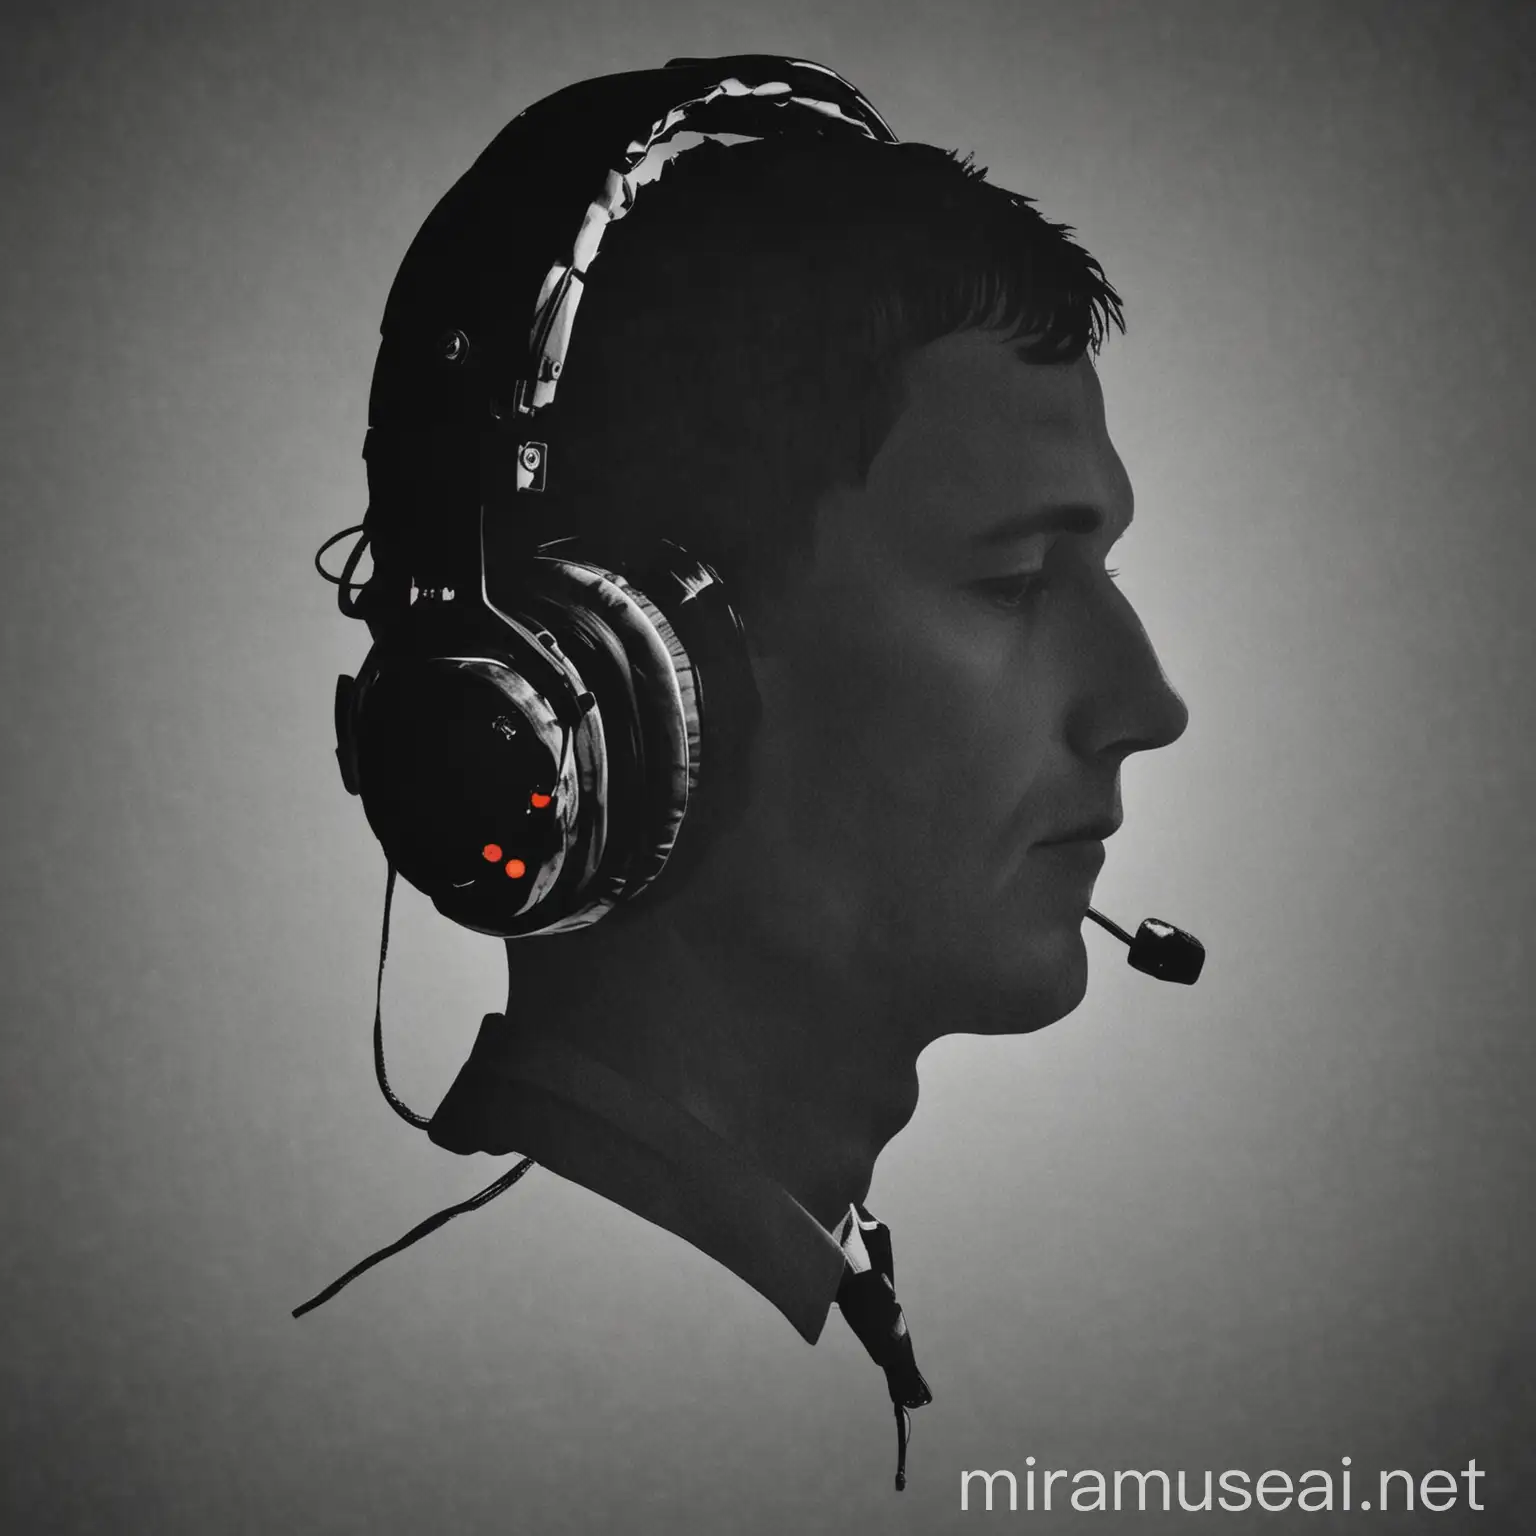 Silhouette of Head with Air Traffic Controller Headphones